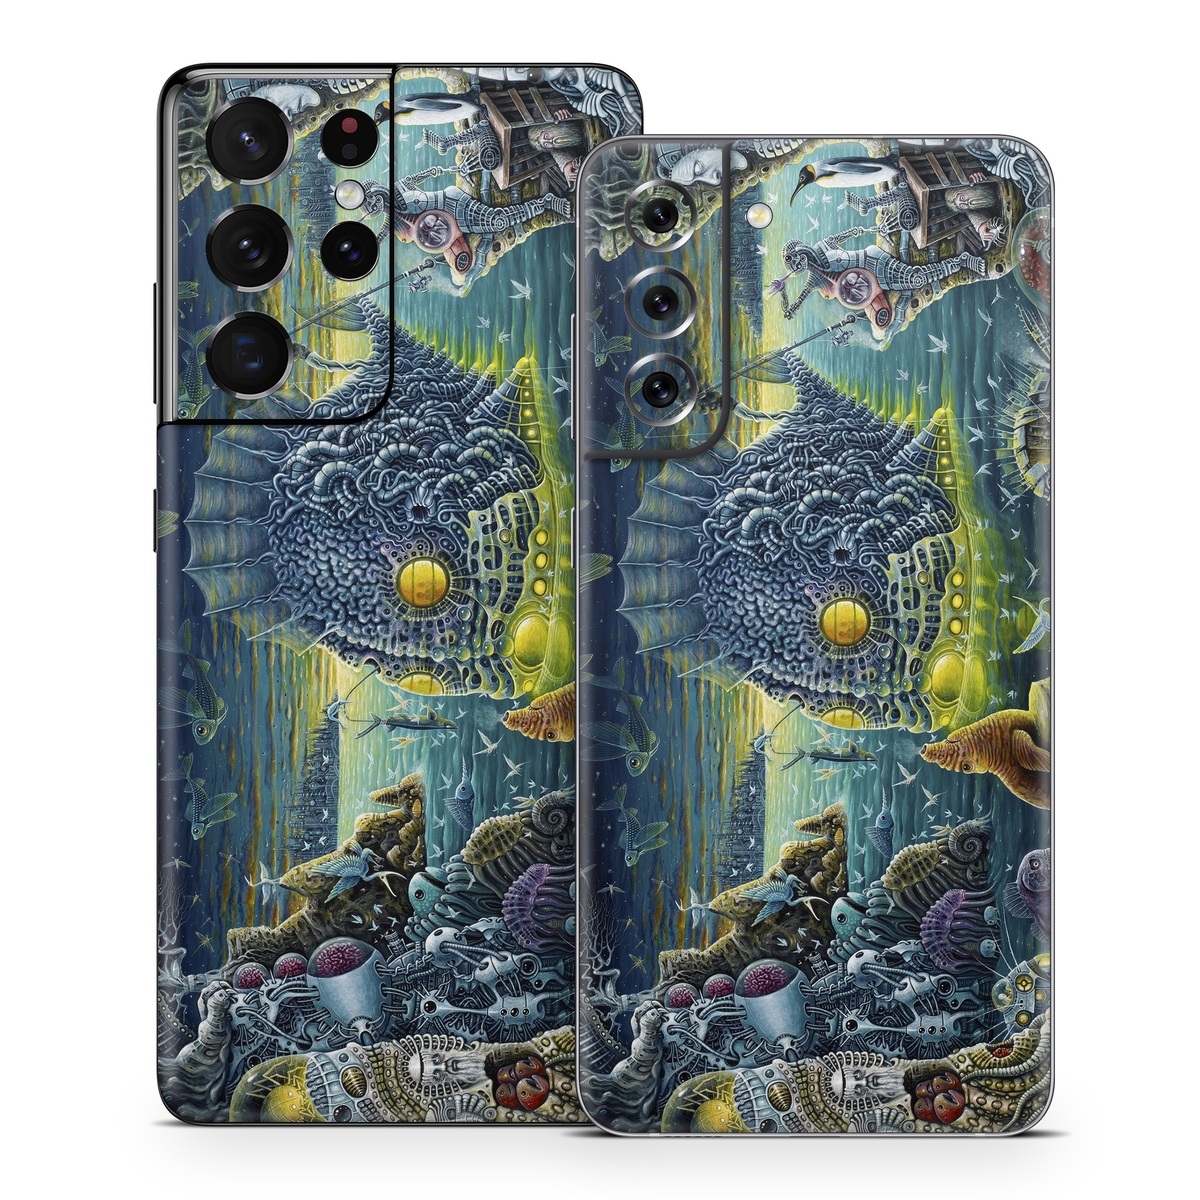 Samsung Galaxy S21 Skin design of Organism, Water, Illustration, Art, Painting, Cg artwork, Fiction, Fictional character, Marine biology, Mythology with black, gray, blue, green colors